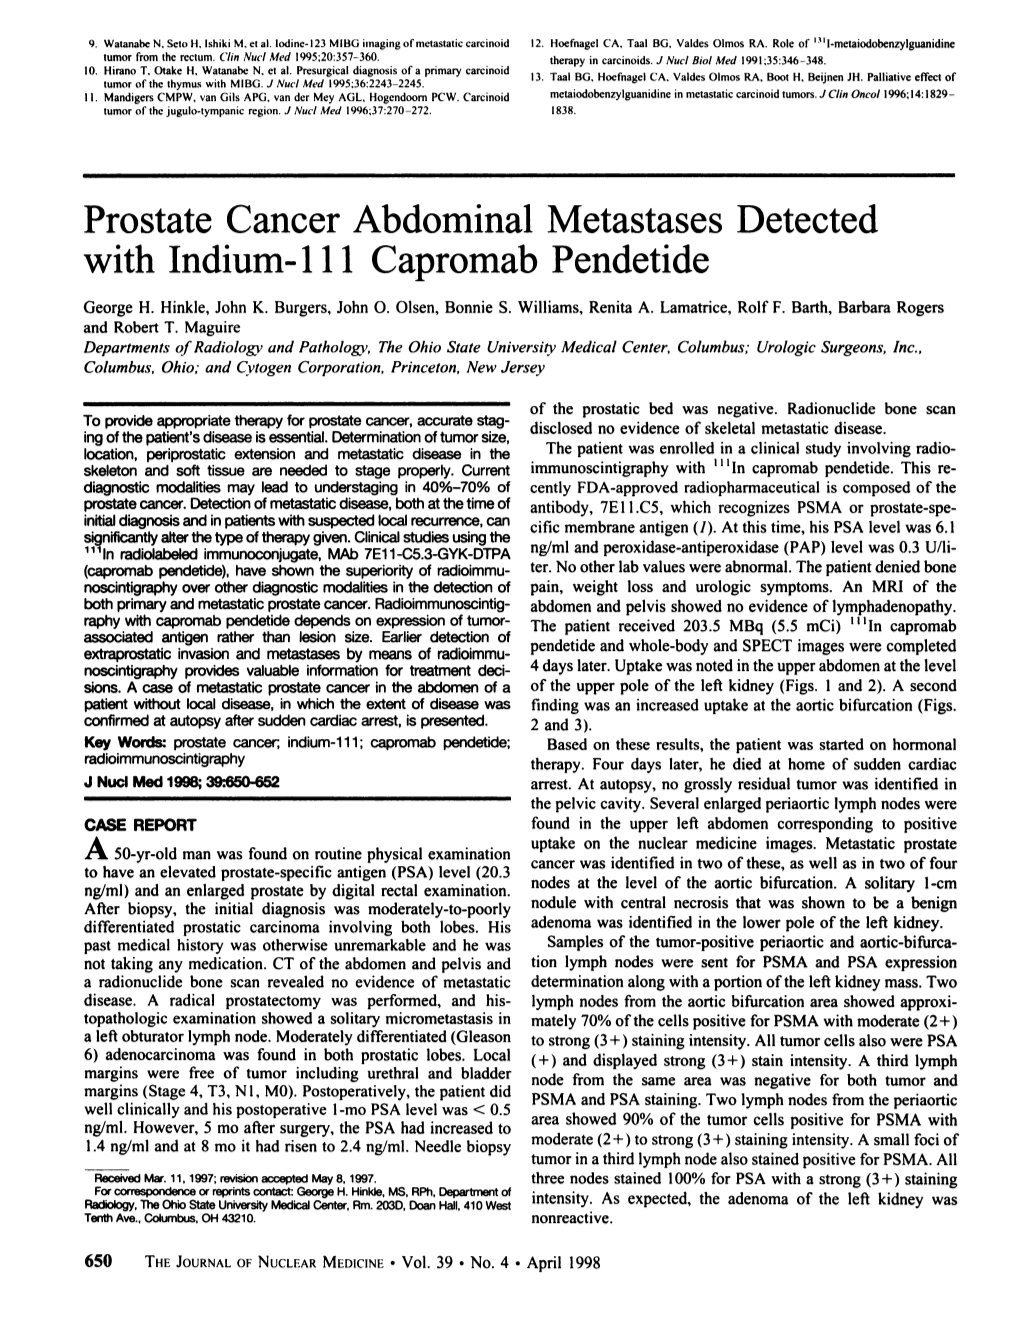 Prostate Cancer Abdominal MÃ©Tastasesdetected with Indium- 111 Capromab Pendetide